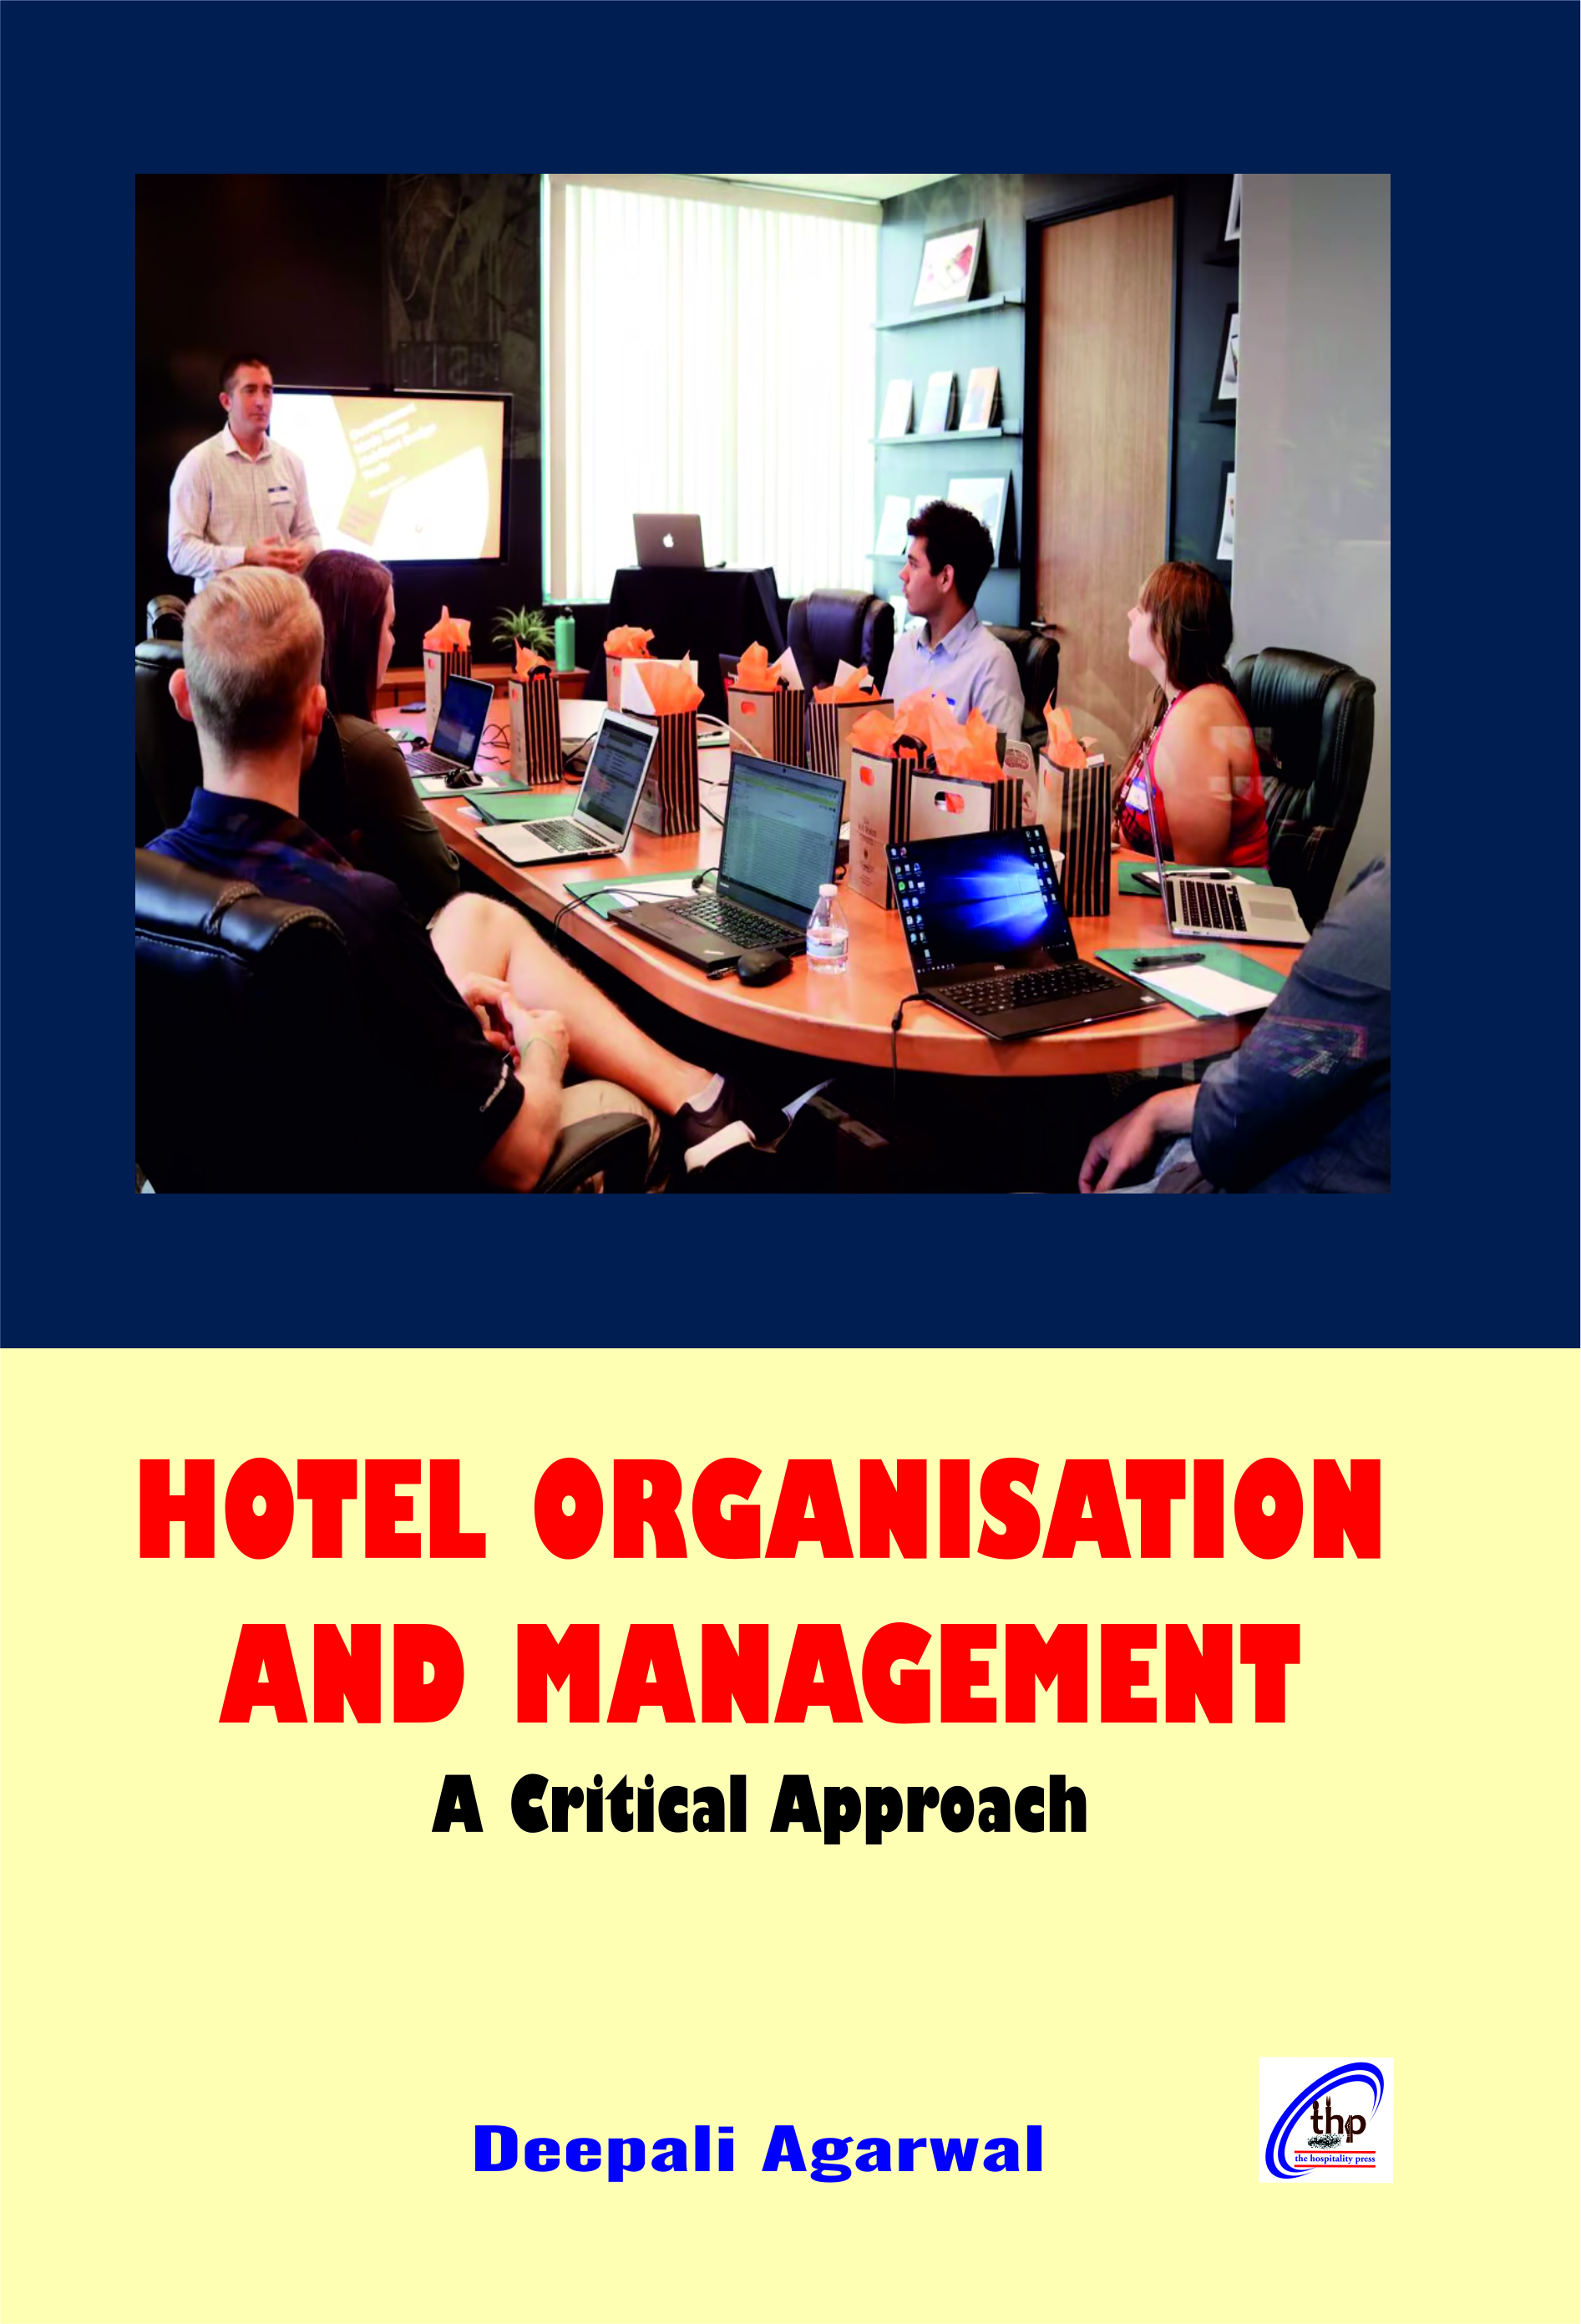 Hotel Organisation and Management A Critical Approach